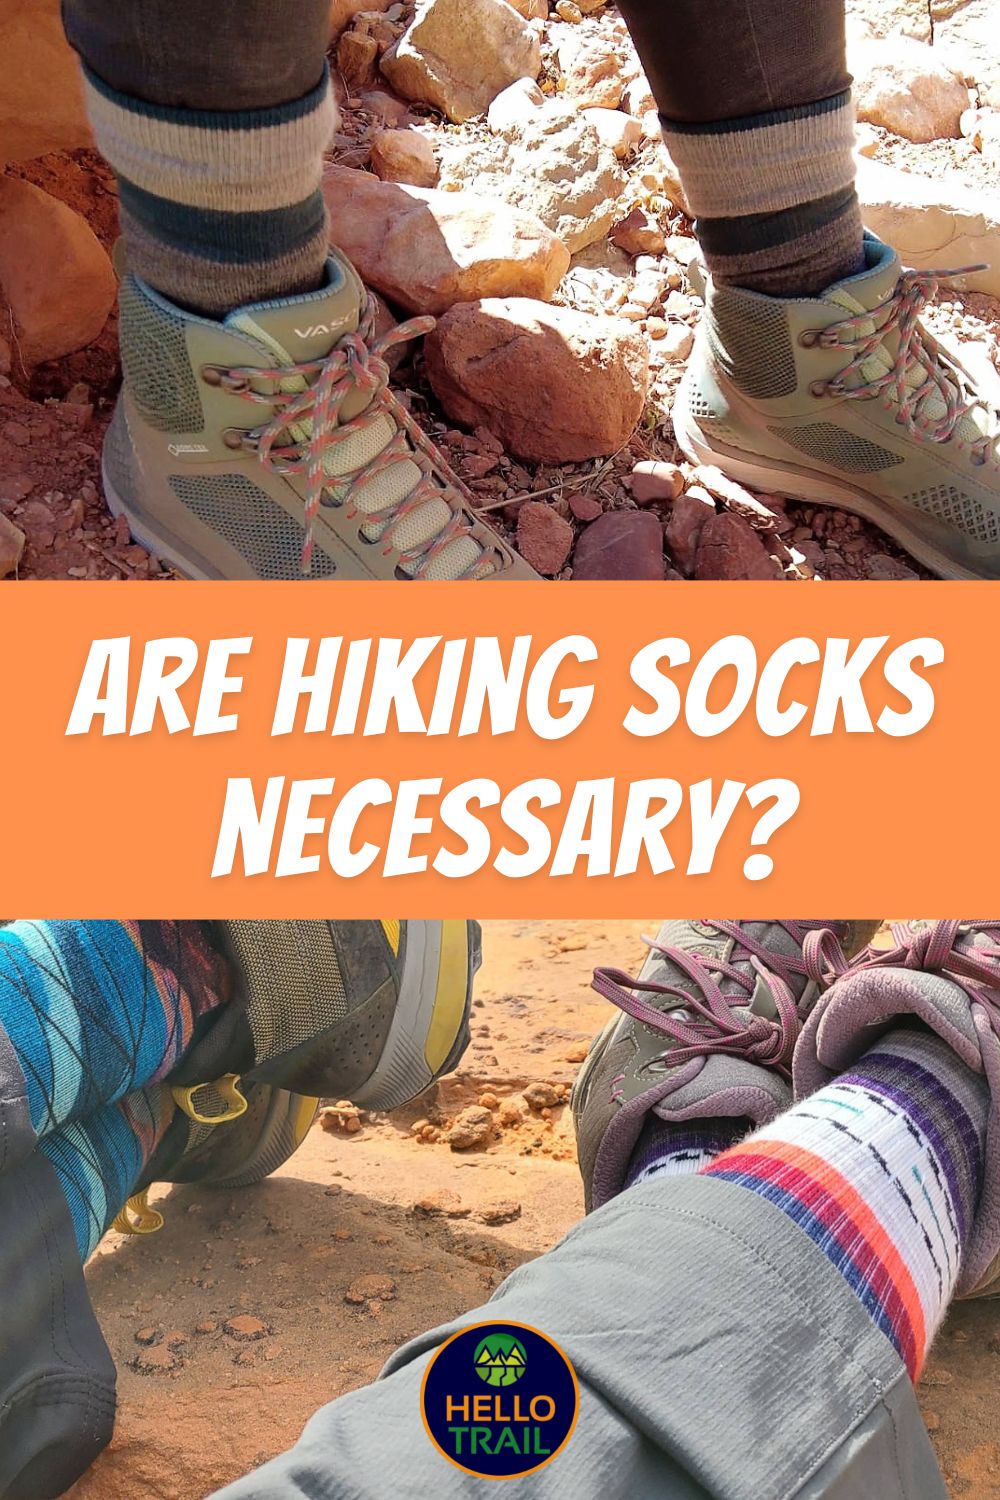 A couple of our favorite pairs of merino wool hiking socks